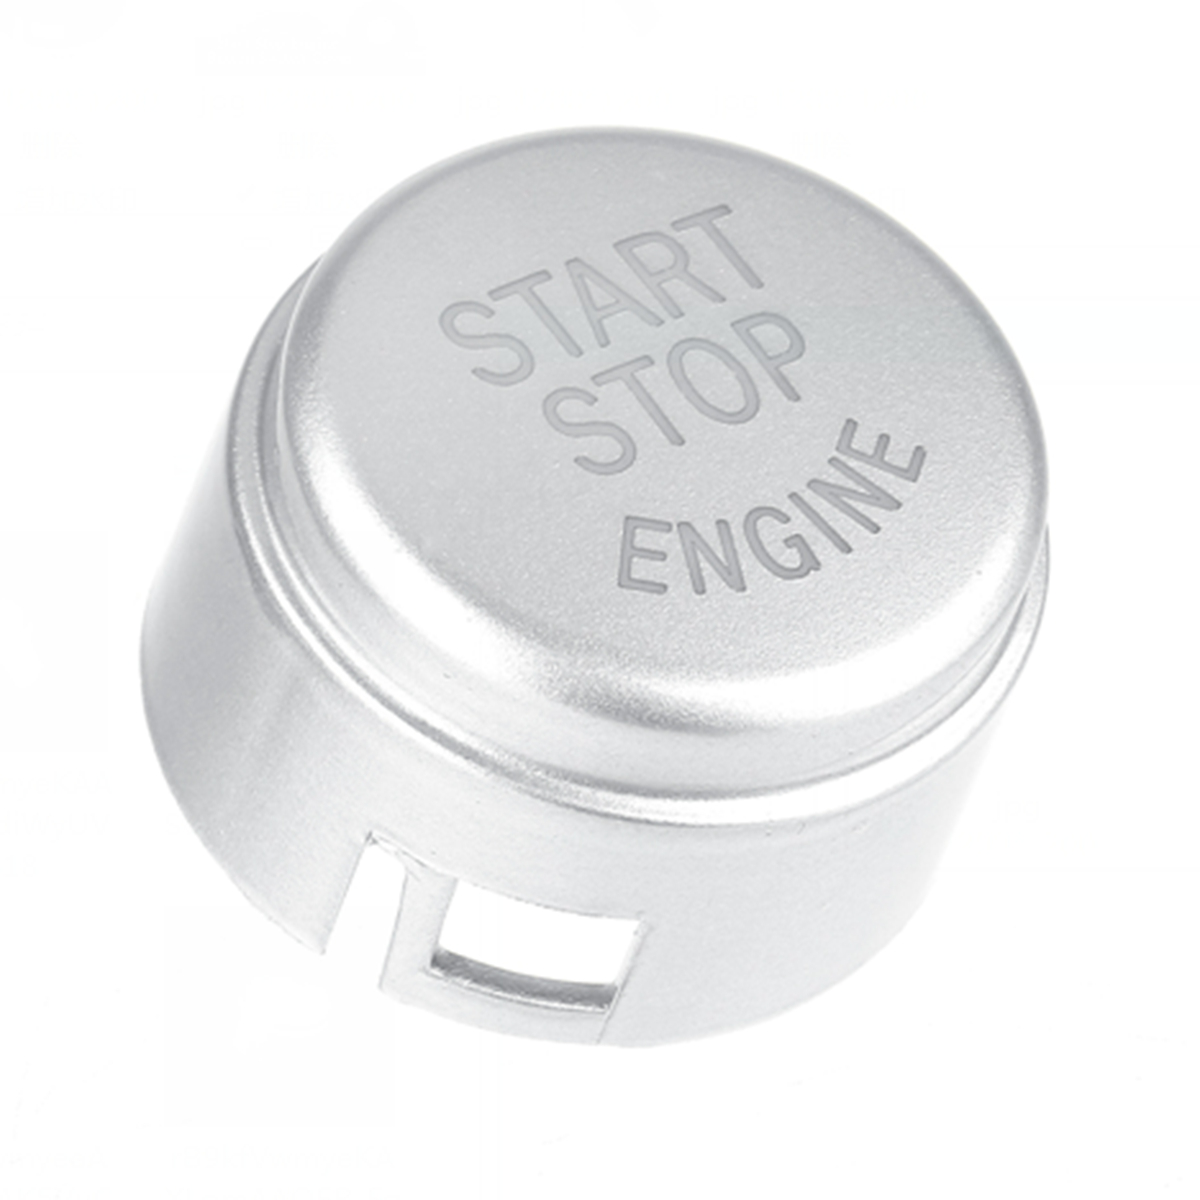 1PCS Start Stop Engine Button Switch Cover Silver for BMW 5 6 7 F01 F02 F10 F11 F12 2009-2013